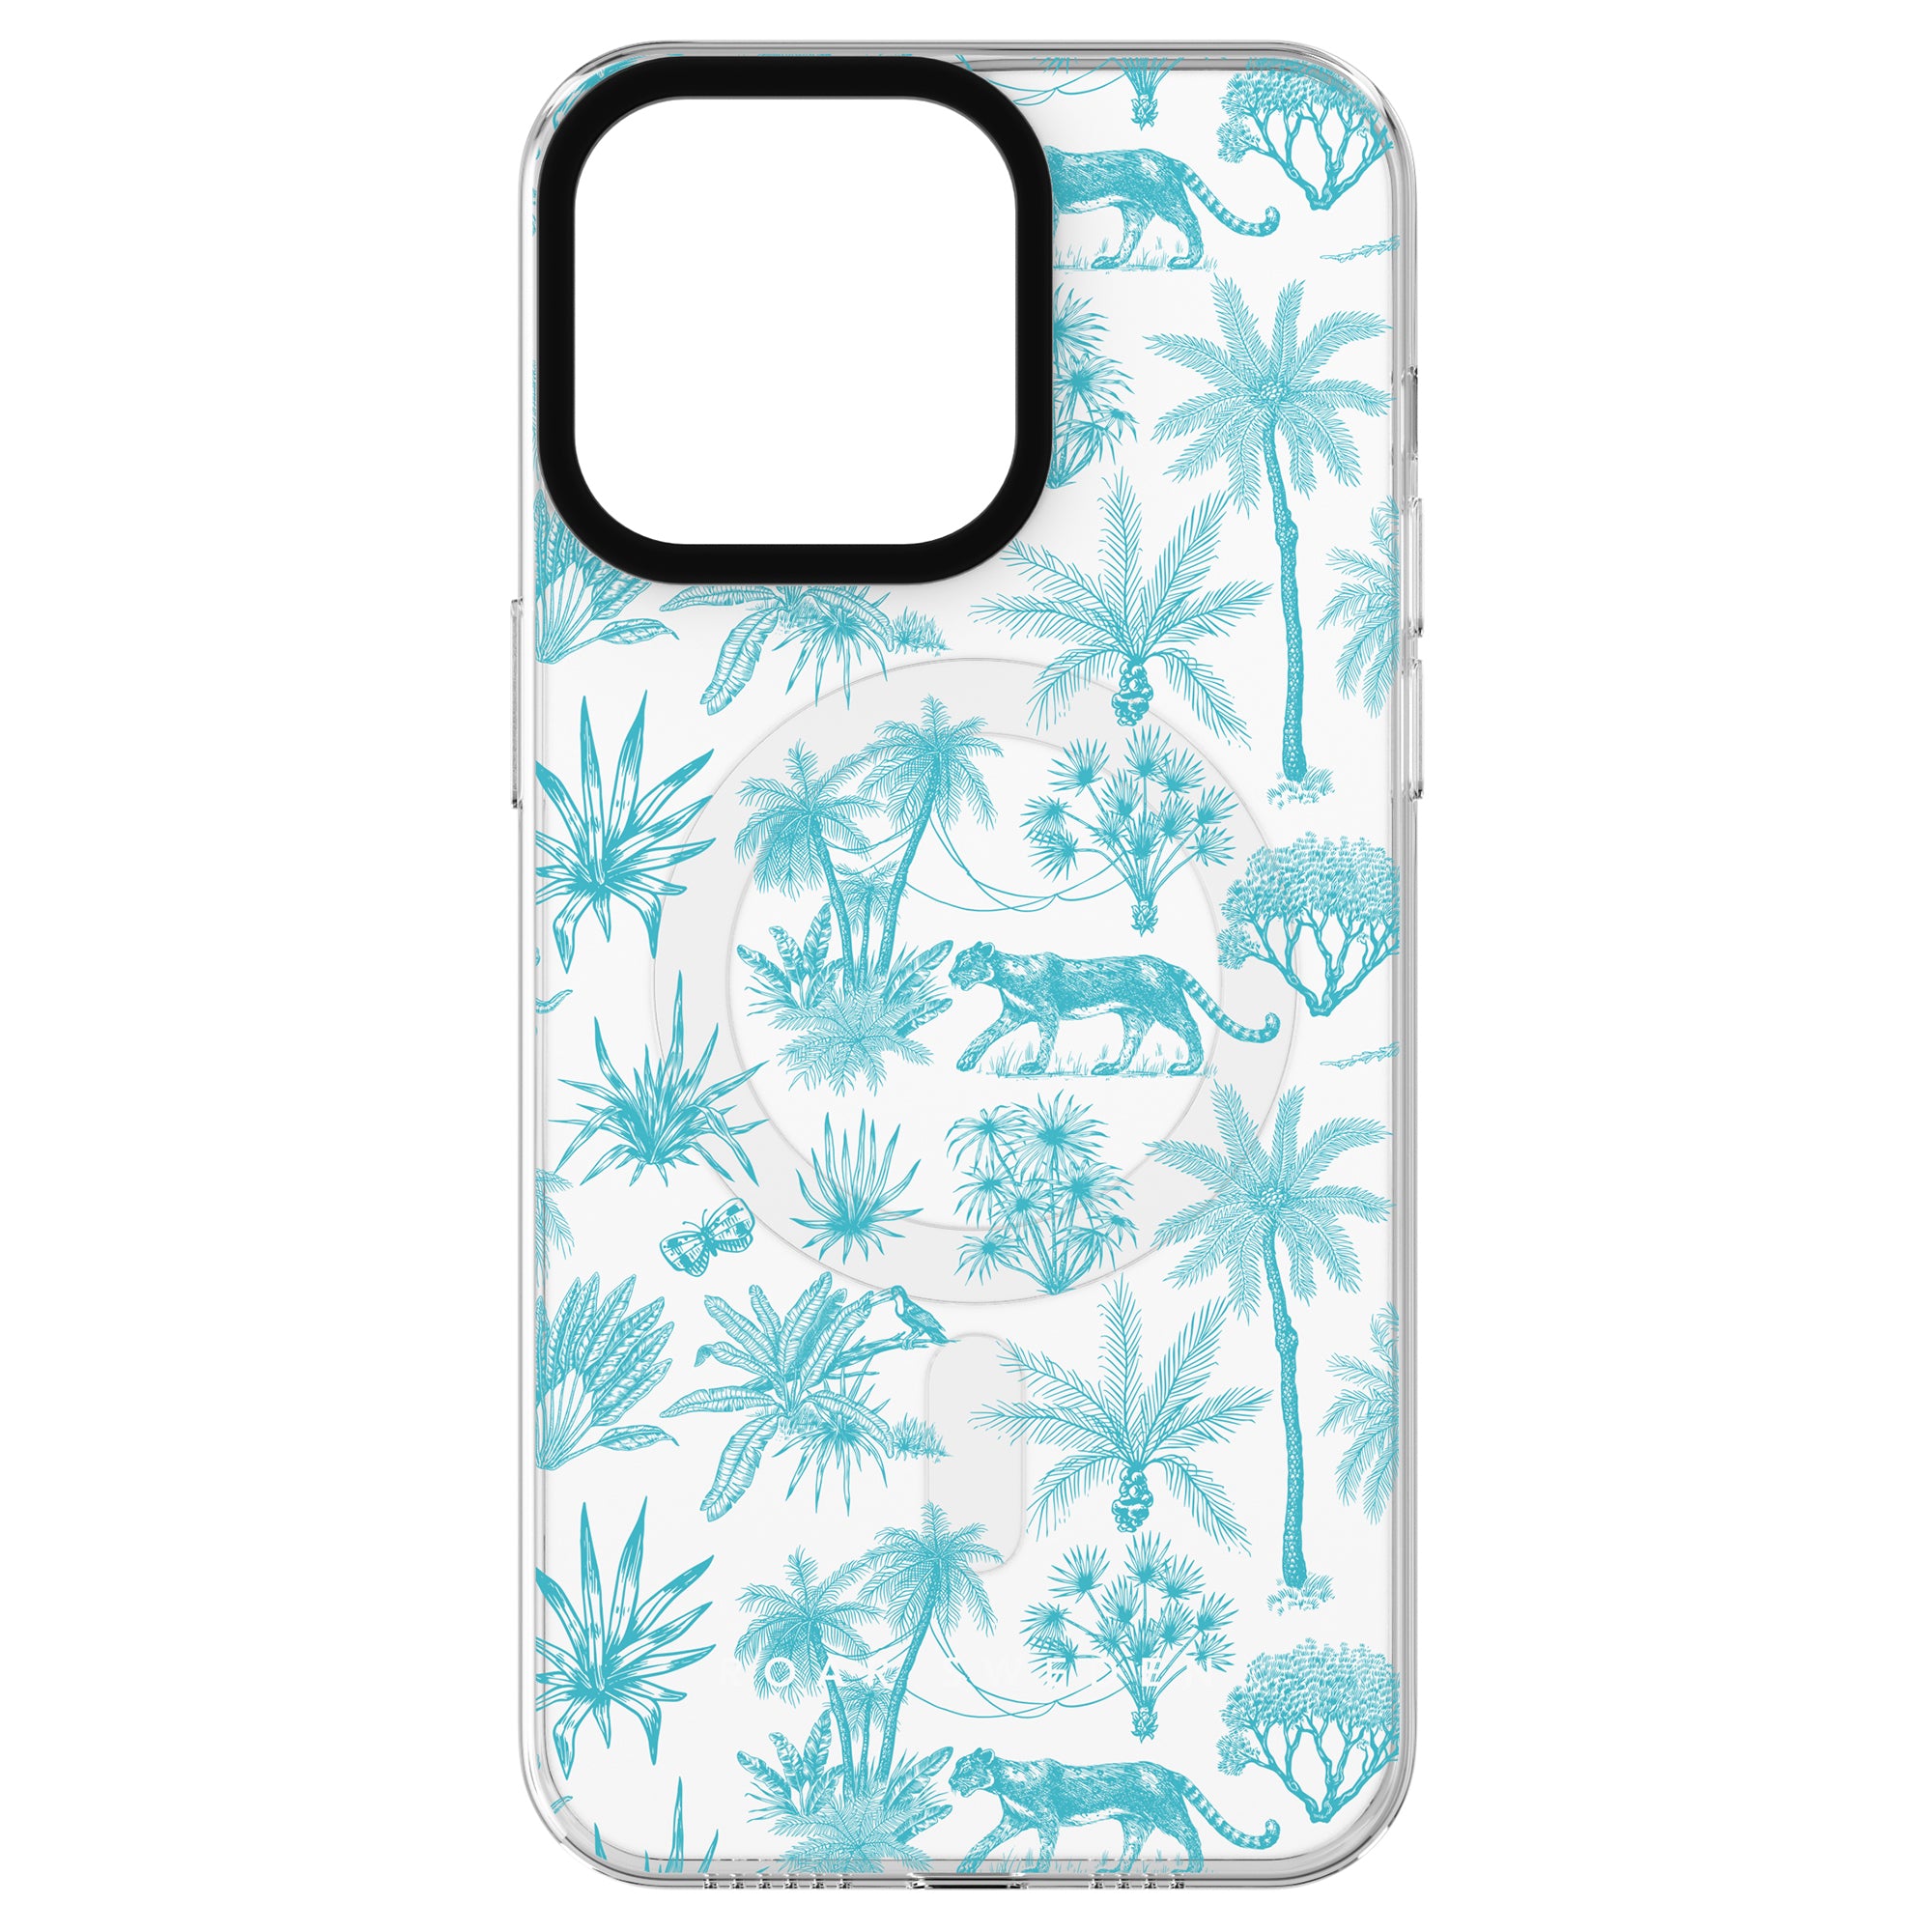 Toile De Jouy Capri - MagSafe from the Toile de Jouy kollektion featuring a tropical design with teal plants and tigers, compatible with the MagSafe-system.